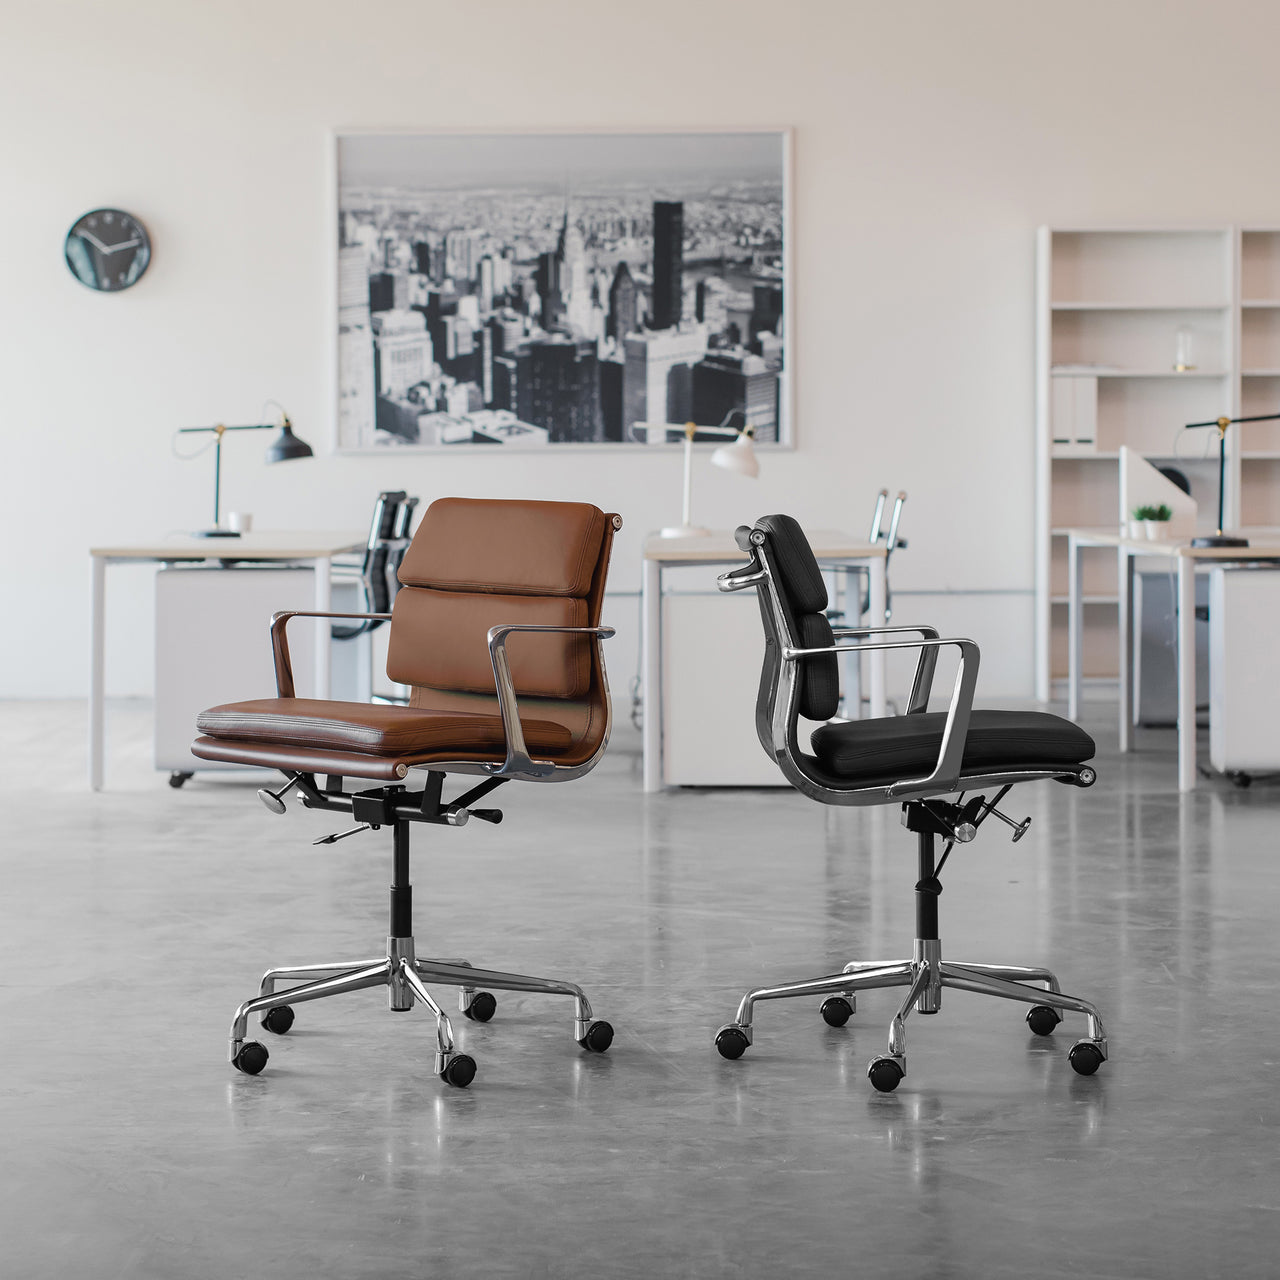 Pro Soft Pad Management Chair (Brown Italian Leather)